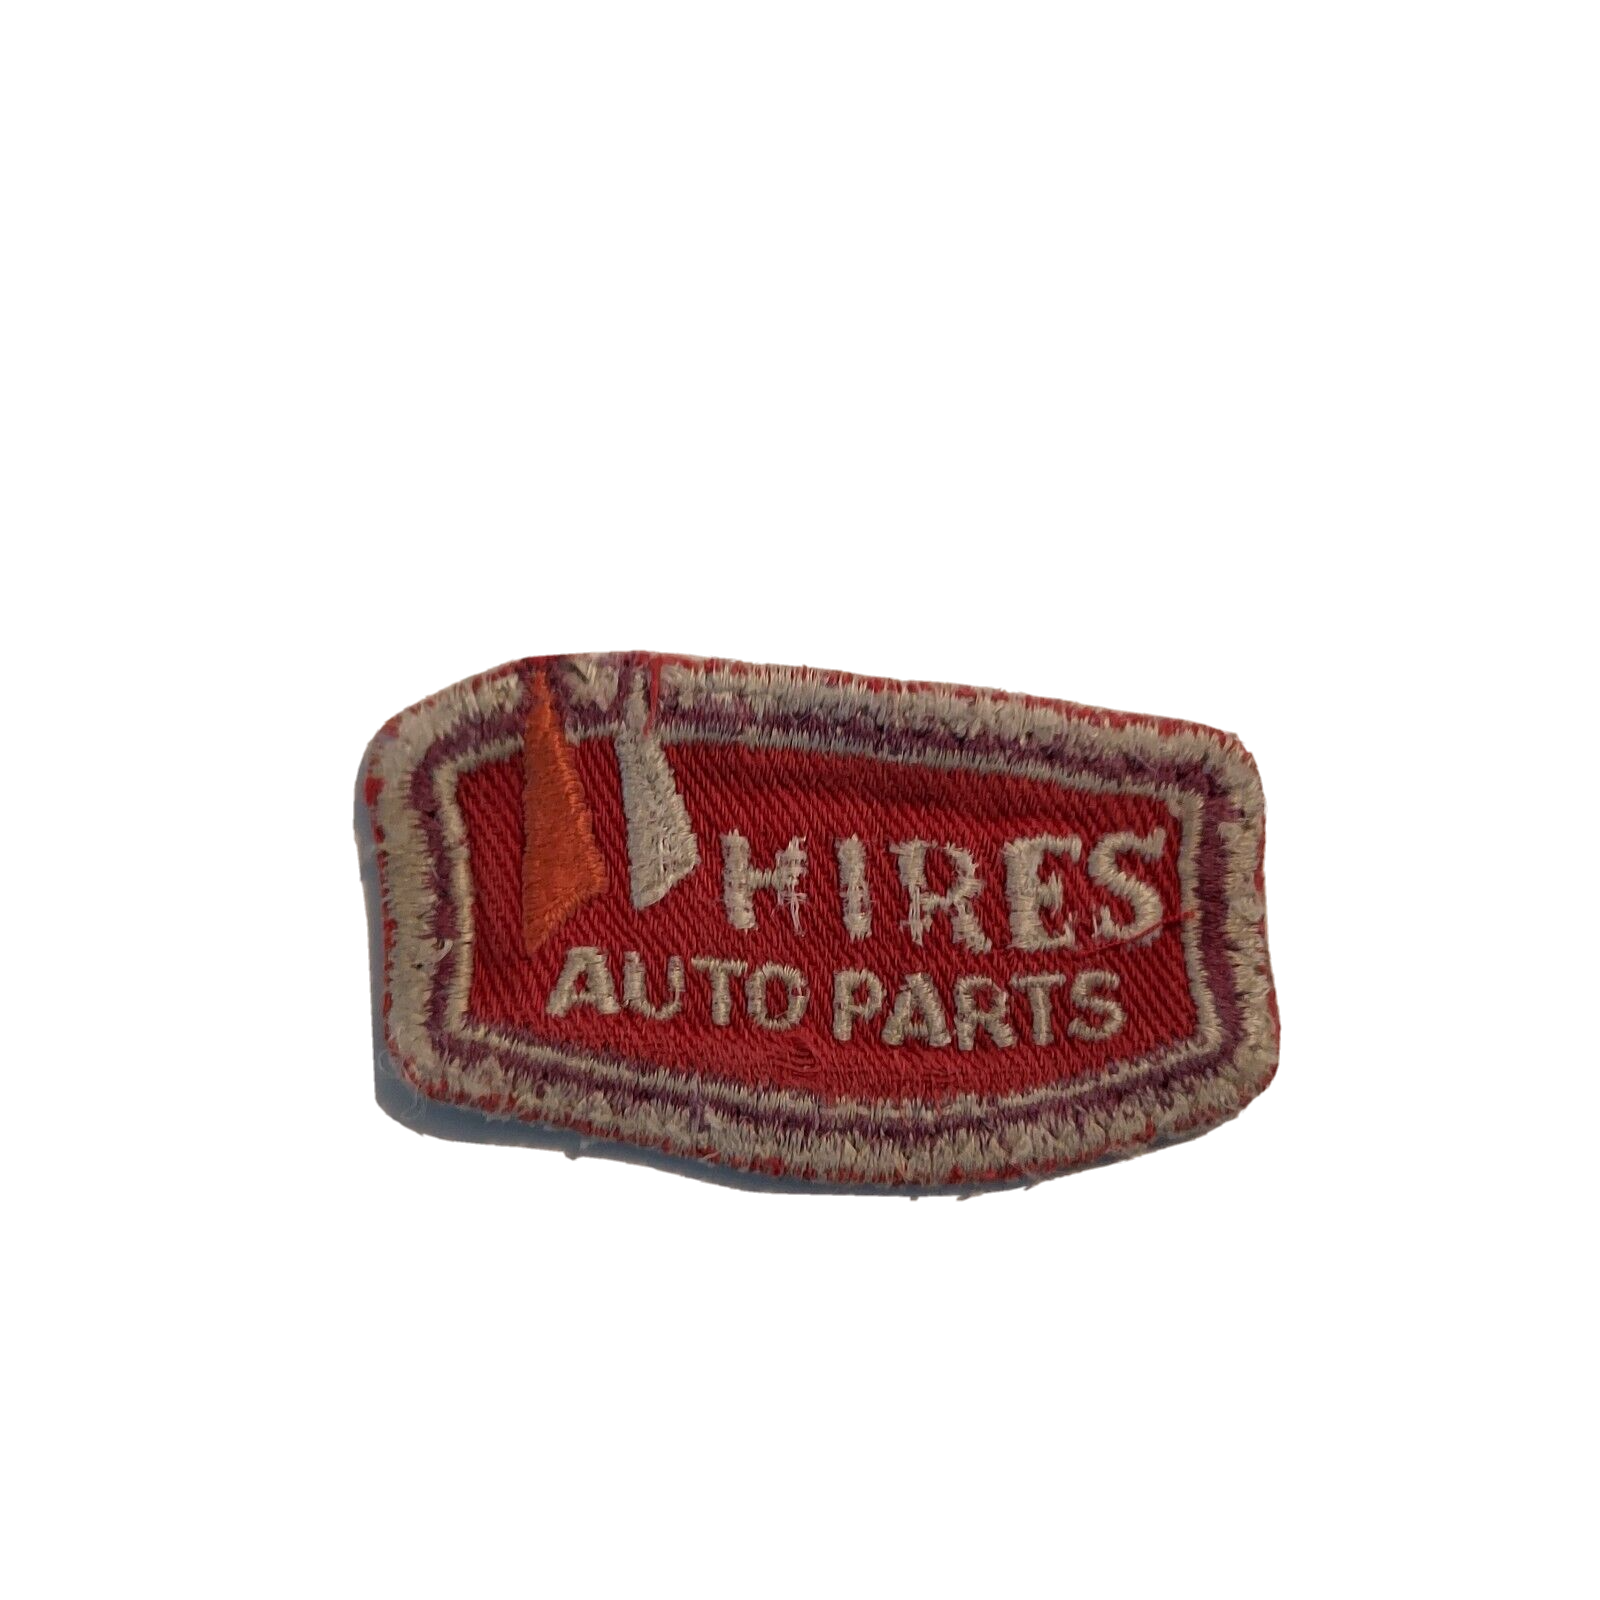 Primary image for Vintage Hires Auto Parts Uniform 2.75"x1.50" Sew-on Patch